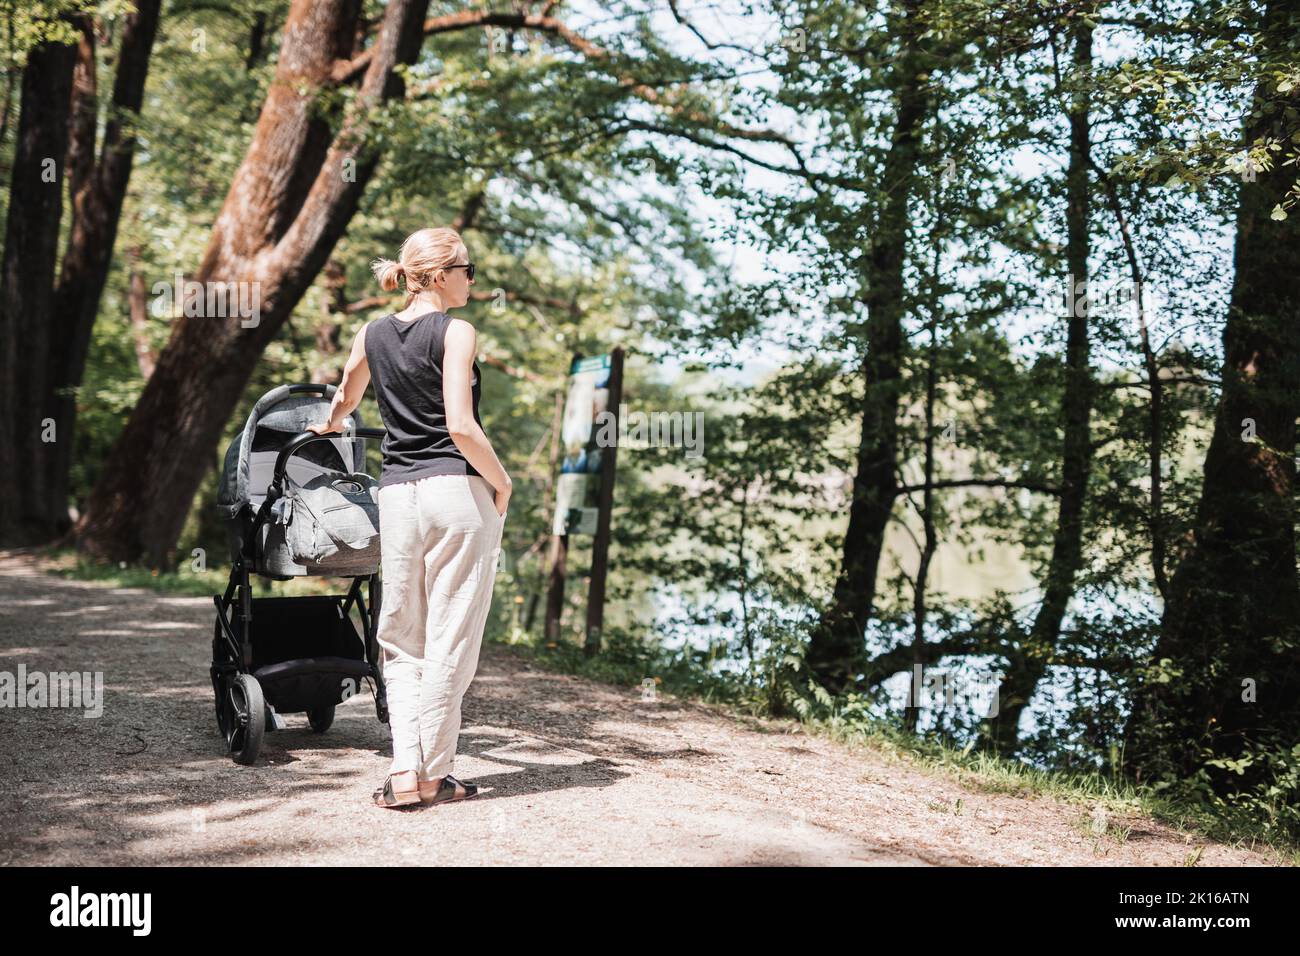 Rear view of casualy dressed mother walking with baby stroller in city park. Family, child and parenthood concept. Stock Photo